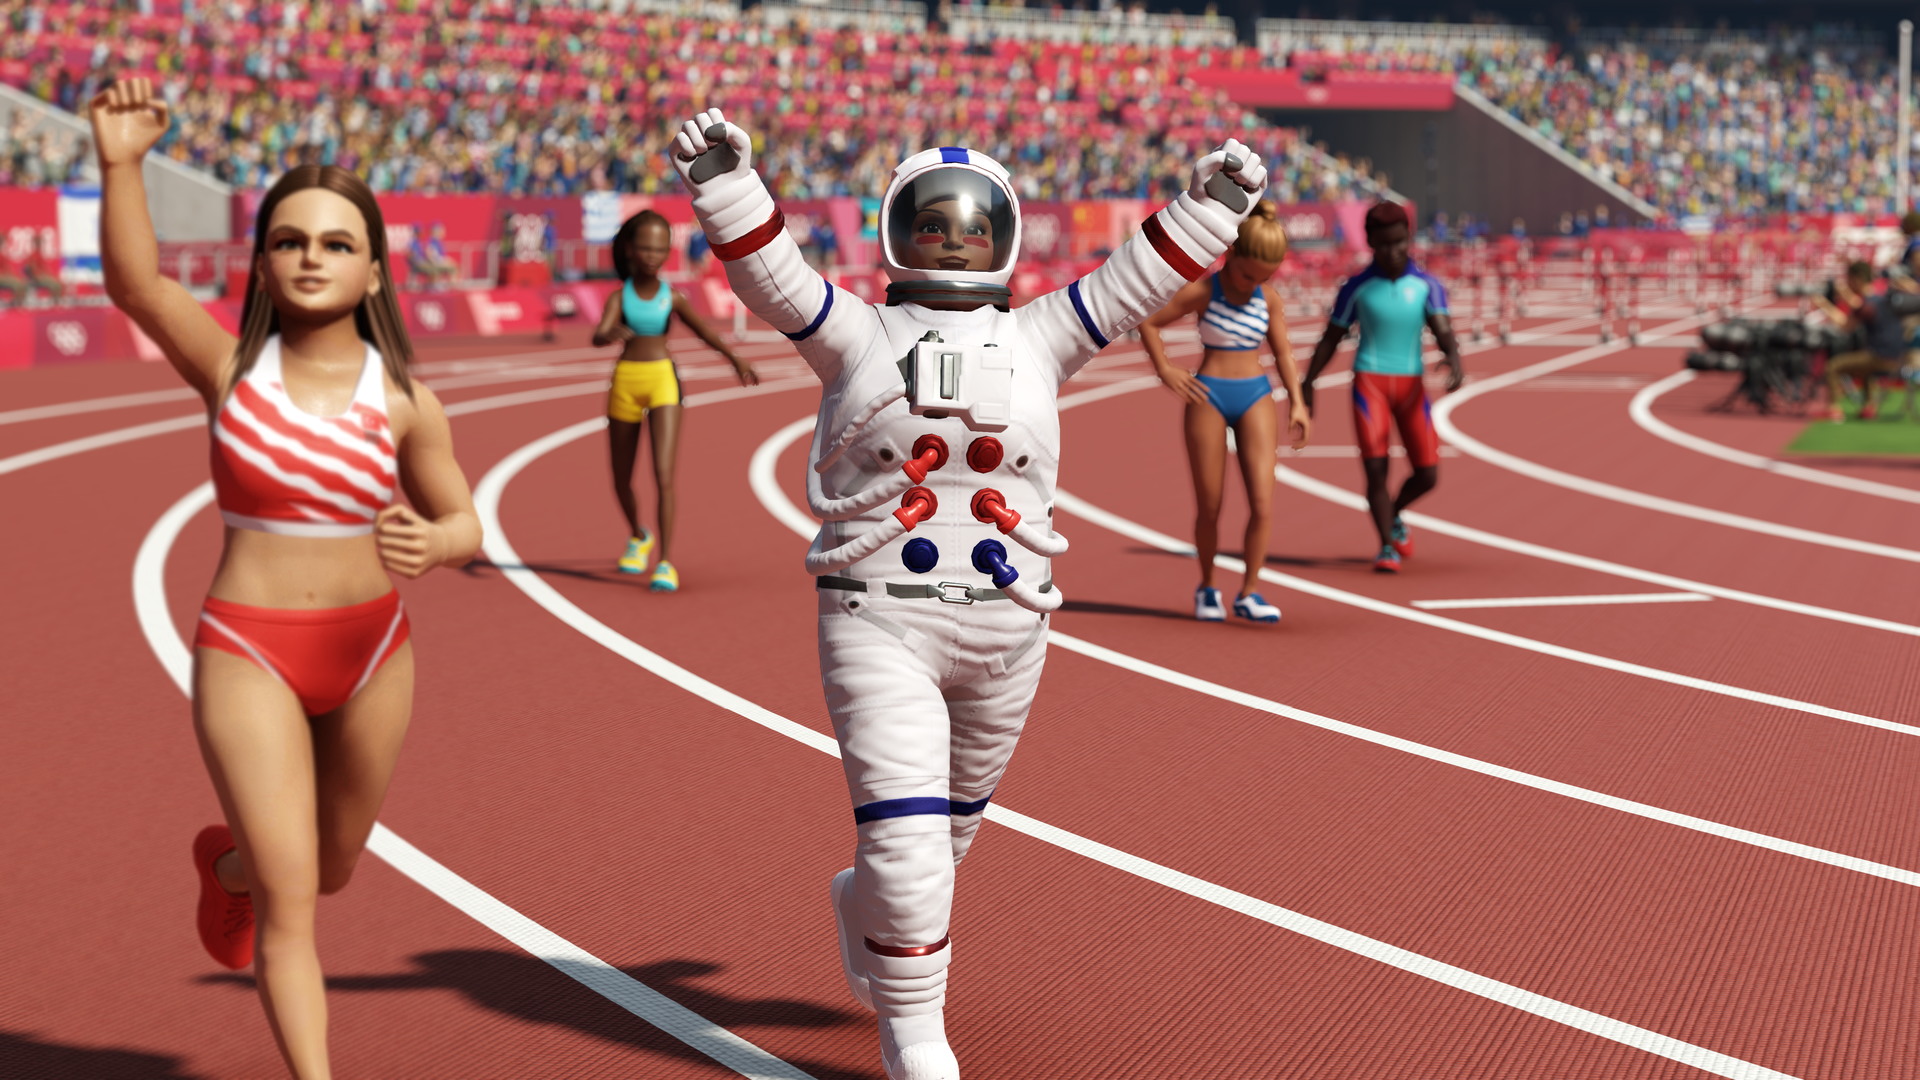 Olympic Games Tokyo 2020 - The Official Video Game - screenshot 16